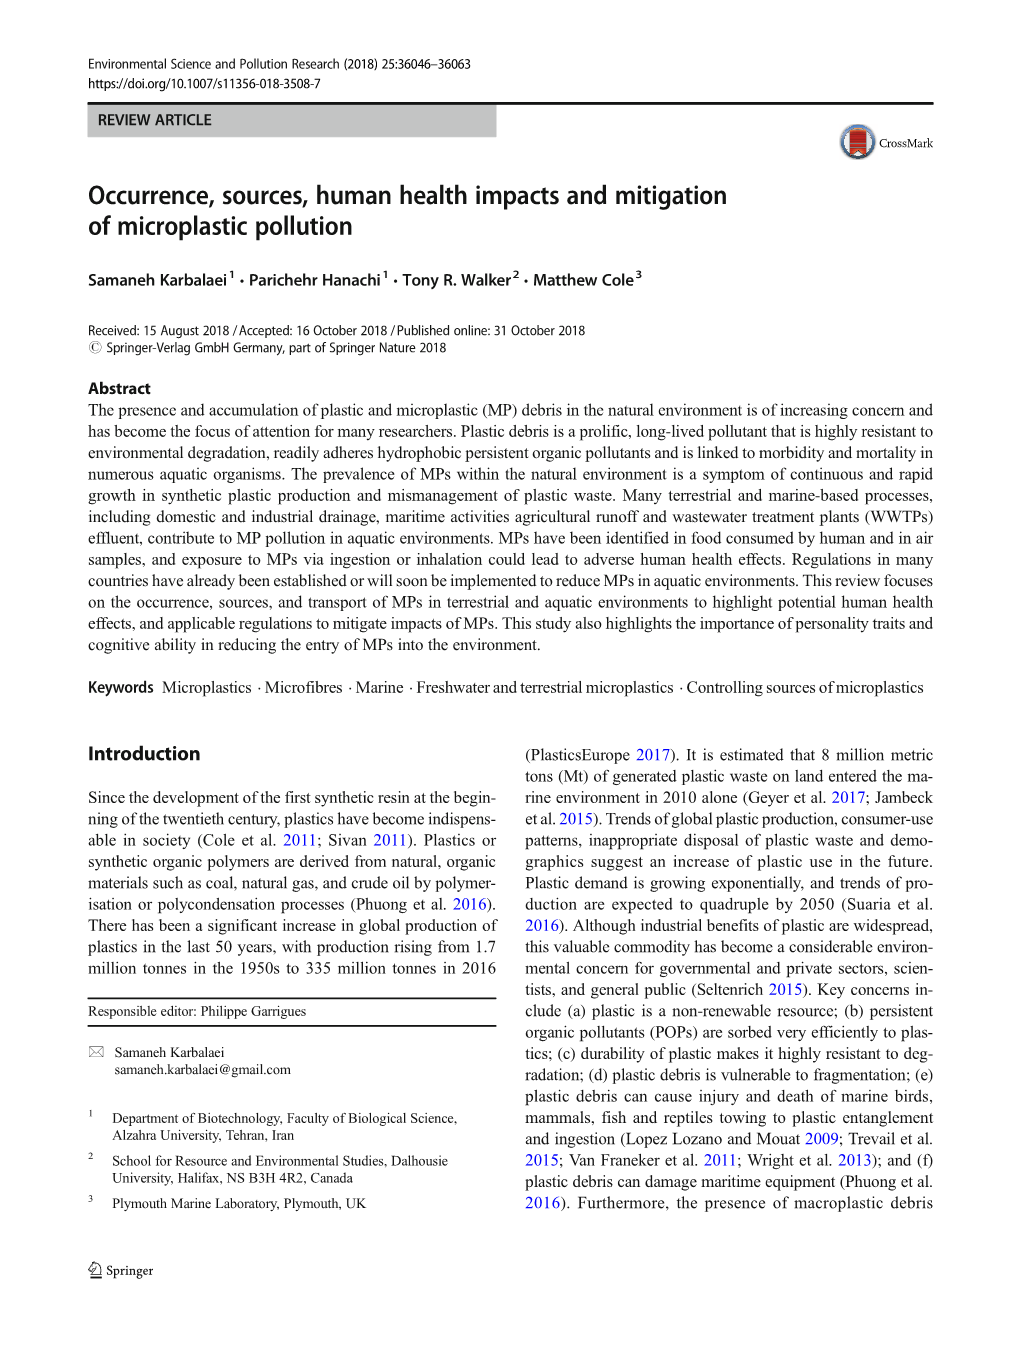 Occurrence, Sources, Human Health Impacts and Mitigation of Microplastic Pollution